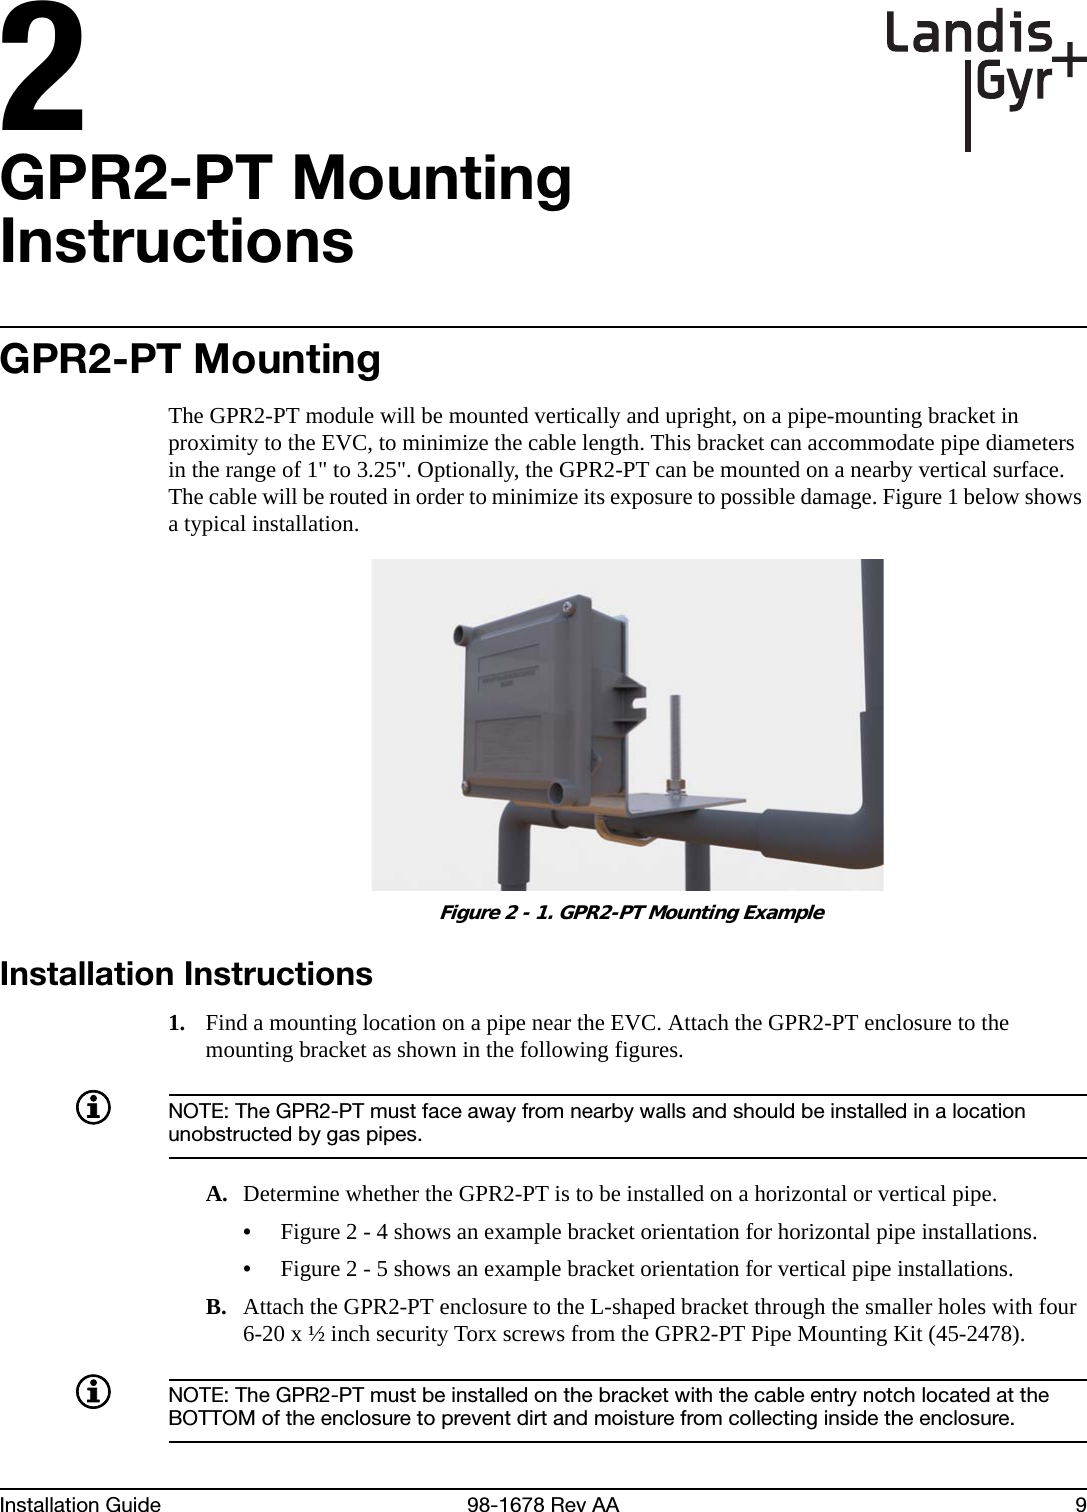 2Installation Guide 98-1678 Rev AA 9GPR2-PT Mounting InstructionsGPR2-PT MountingThe GPR2-PT module will be mounted vertically and upright, on a pipe-mounting bracket in proximity to the EVC, to minimize the cable length. This bracket can accommodate pipe diameters in the range of 1&quot; to 3.25&quot;. Optionally, the GPR2-PT can be mounted on a nearby vertical surface. The cable will be routed in order to minimize its exposure to possible damage. Figure 1 below shows a typical installation. Figure 2 - 1. GPR2-PT Mounting ExampleInstallation Instructions1. Find a mounting location on a pipe near the EVC. Attach the GPR2-PT enclosure to the mounting bracket as shown in the following figures.NOTE: The GPR2-PT must face away from nearby walls and should be installed in a location unobstructed by gas pipes.A. Determine whether the GPR2-PT is to be installed on a horizontal or vertical pipe.•Figure 2 - 4 shows an example bracket orientation for horizontal pipe installations.•Figure 2 - 5 shows an example bracket orientation for vertical pipe installations.B. Attach the GPR2-PT enclosure to the L-shaped bracket through the smaller holes with four 6-20 x ½ inch security Torx screws from the GPR2-PT Pipe Mounting Kit (45-2478).NOTE: The GPR2-PT must be installed on the bracket with the cable entry notch located at the BOTTOM of the enclosure to prevent dirt and moisture from collecting inside the enclosure.